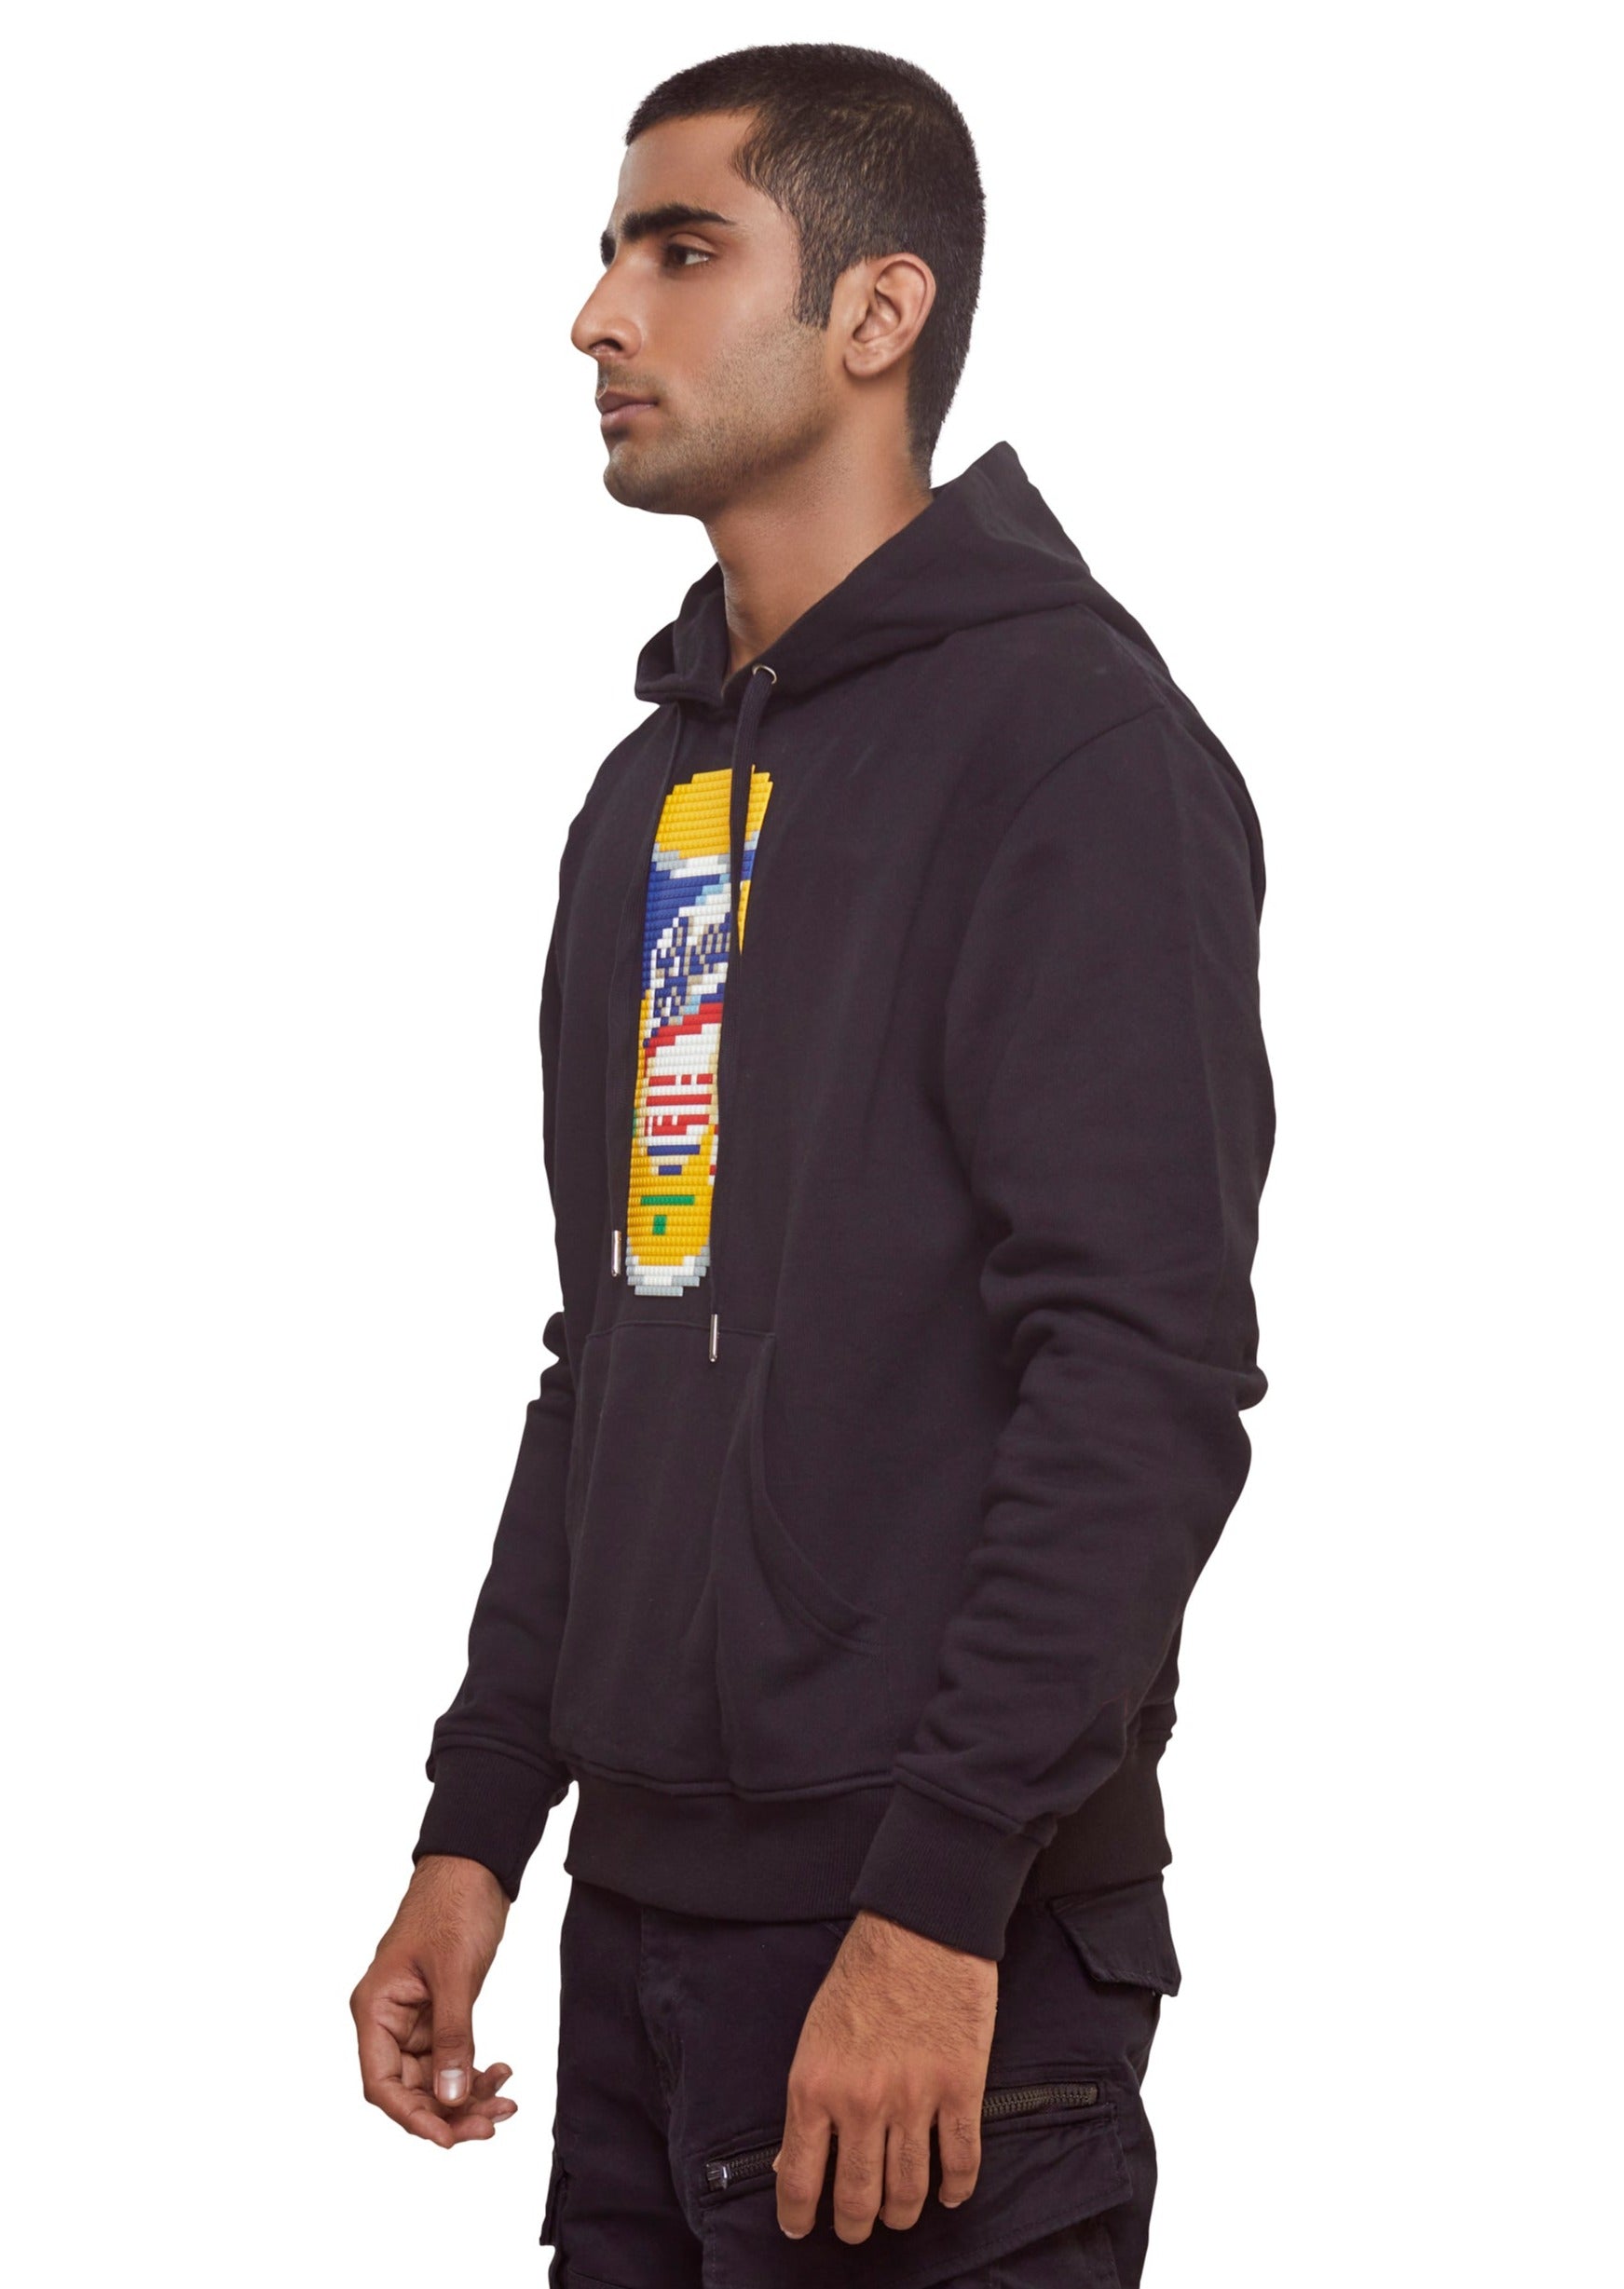 Black cotton hoodie with Signature "8-Bit" pixelated silicone appliquÃ© at chest and Slogan print at the back.